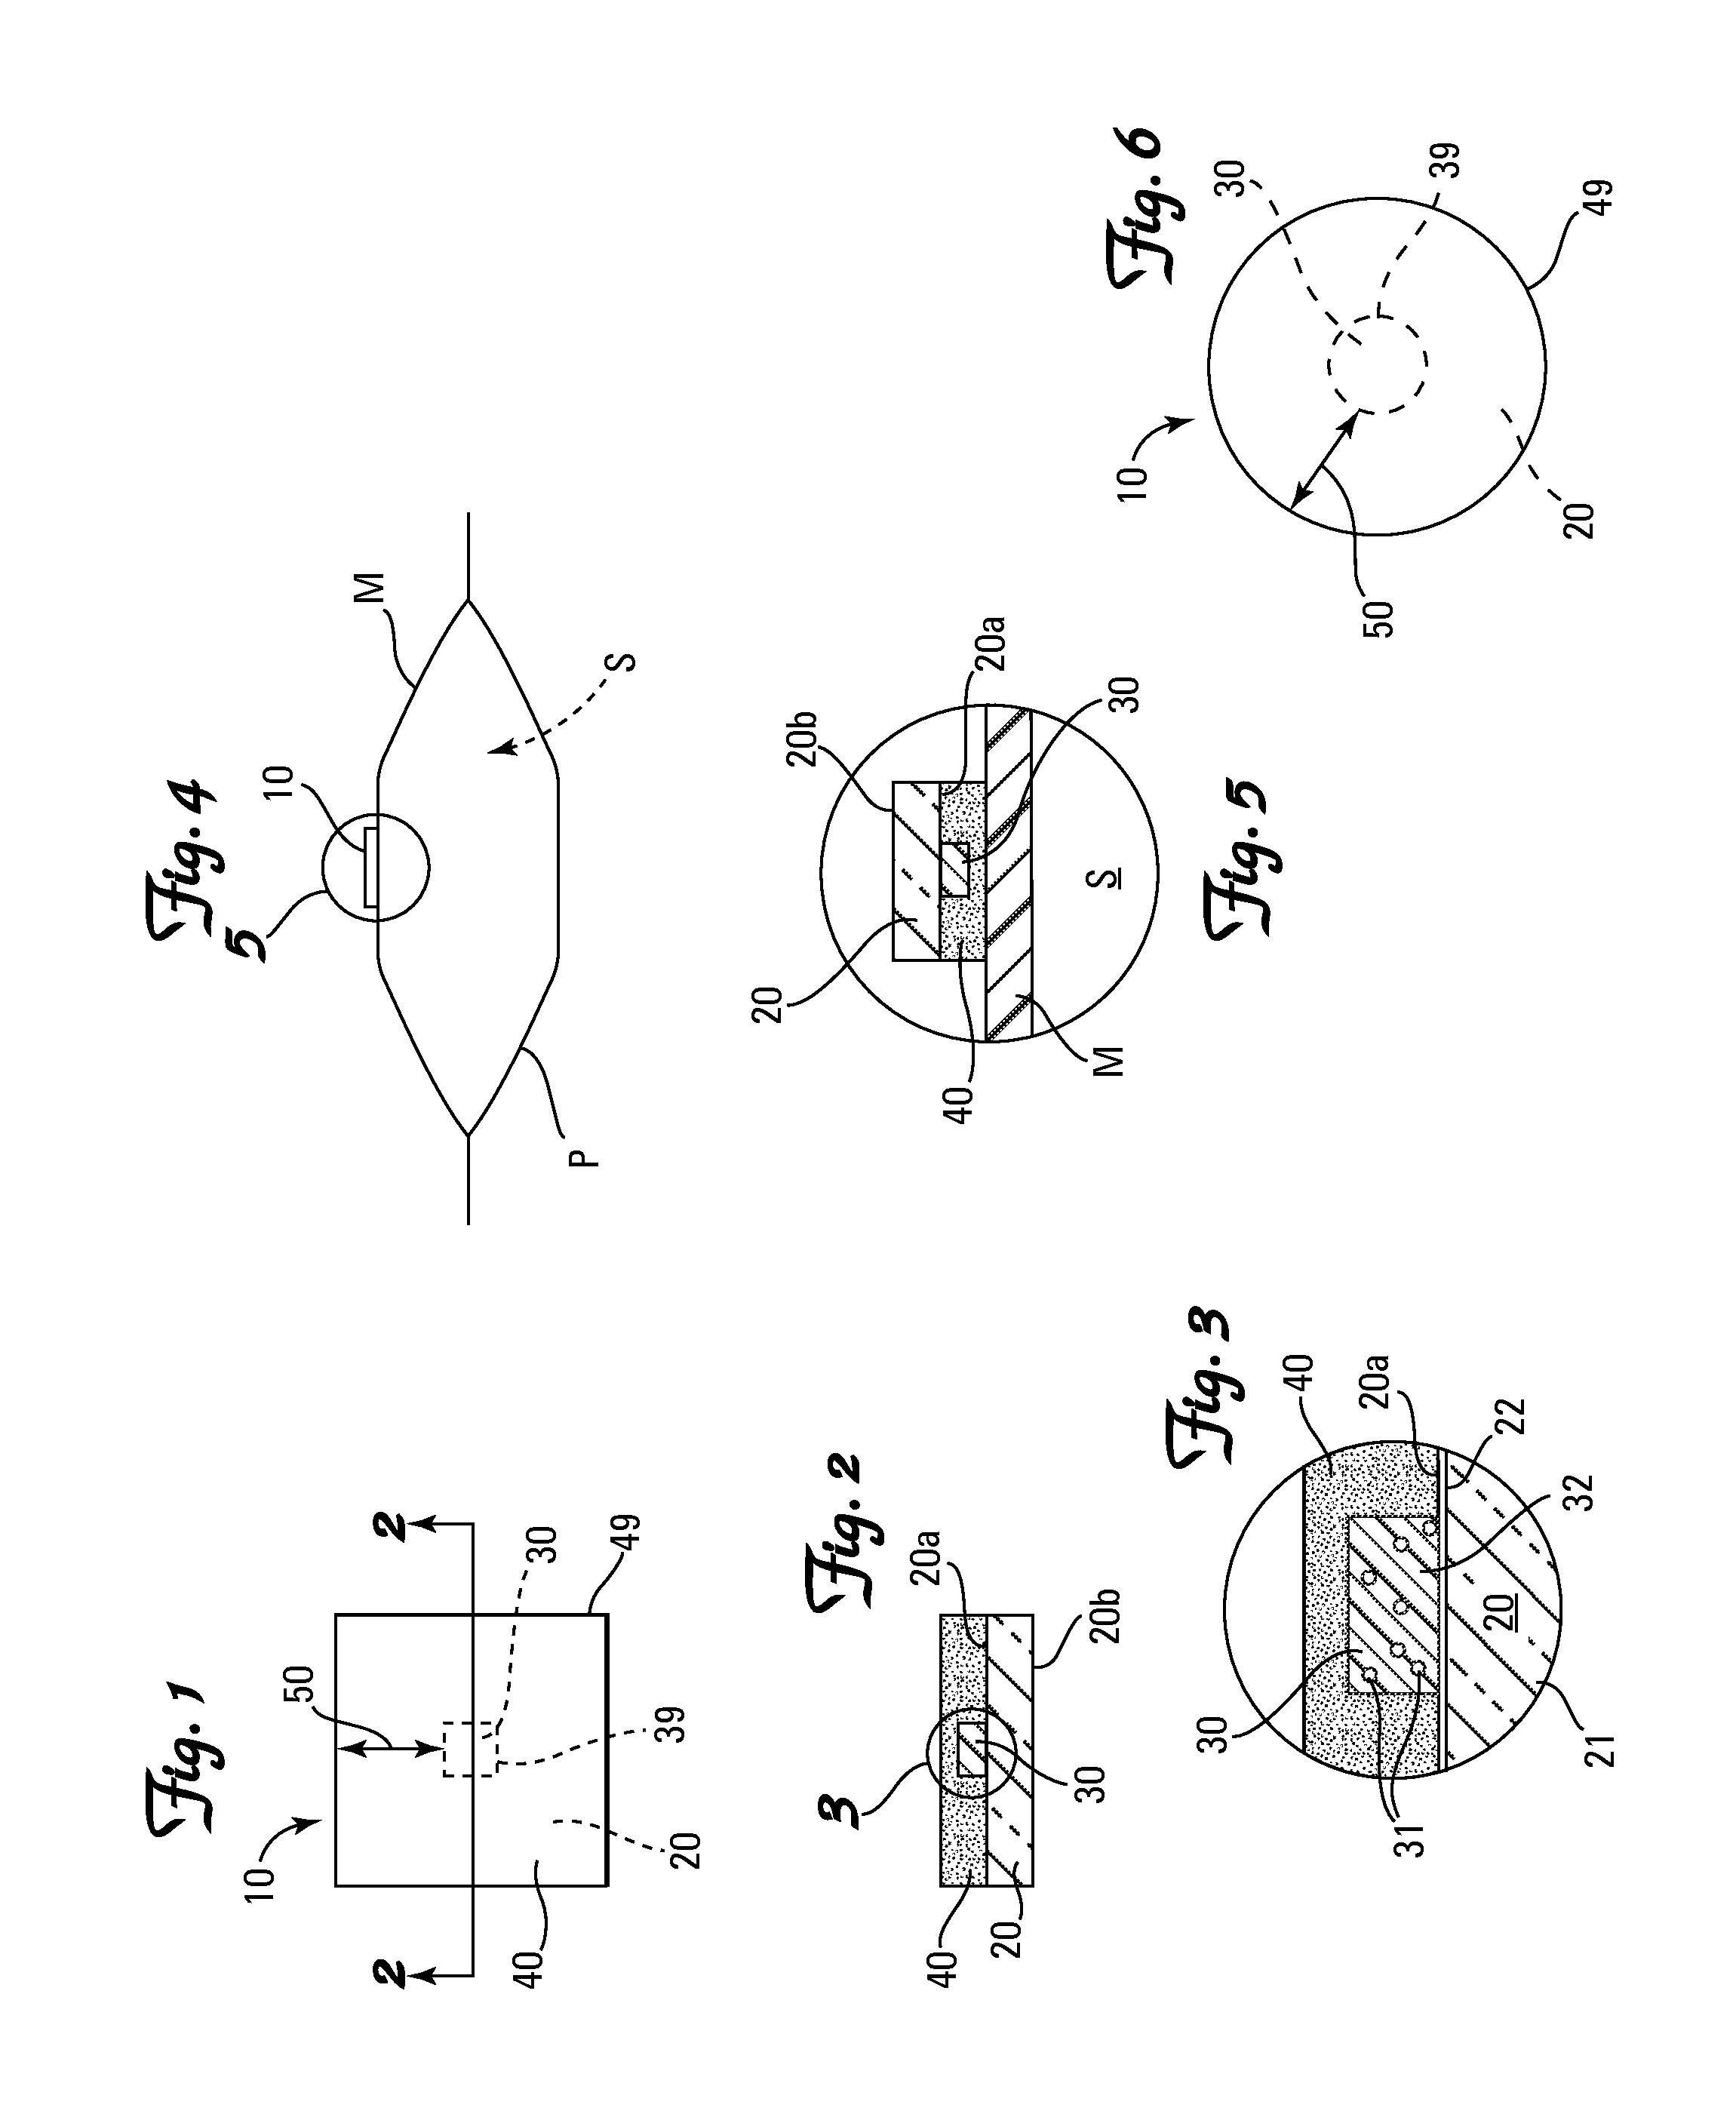 Methods for transmembrane measurement of oxygen concentration and monitoring changes in oxygen concentration within a space enclosed by a membrane employing a photoluminescent transmembrane oxygen probe